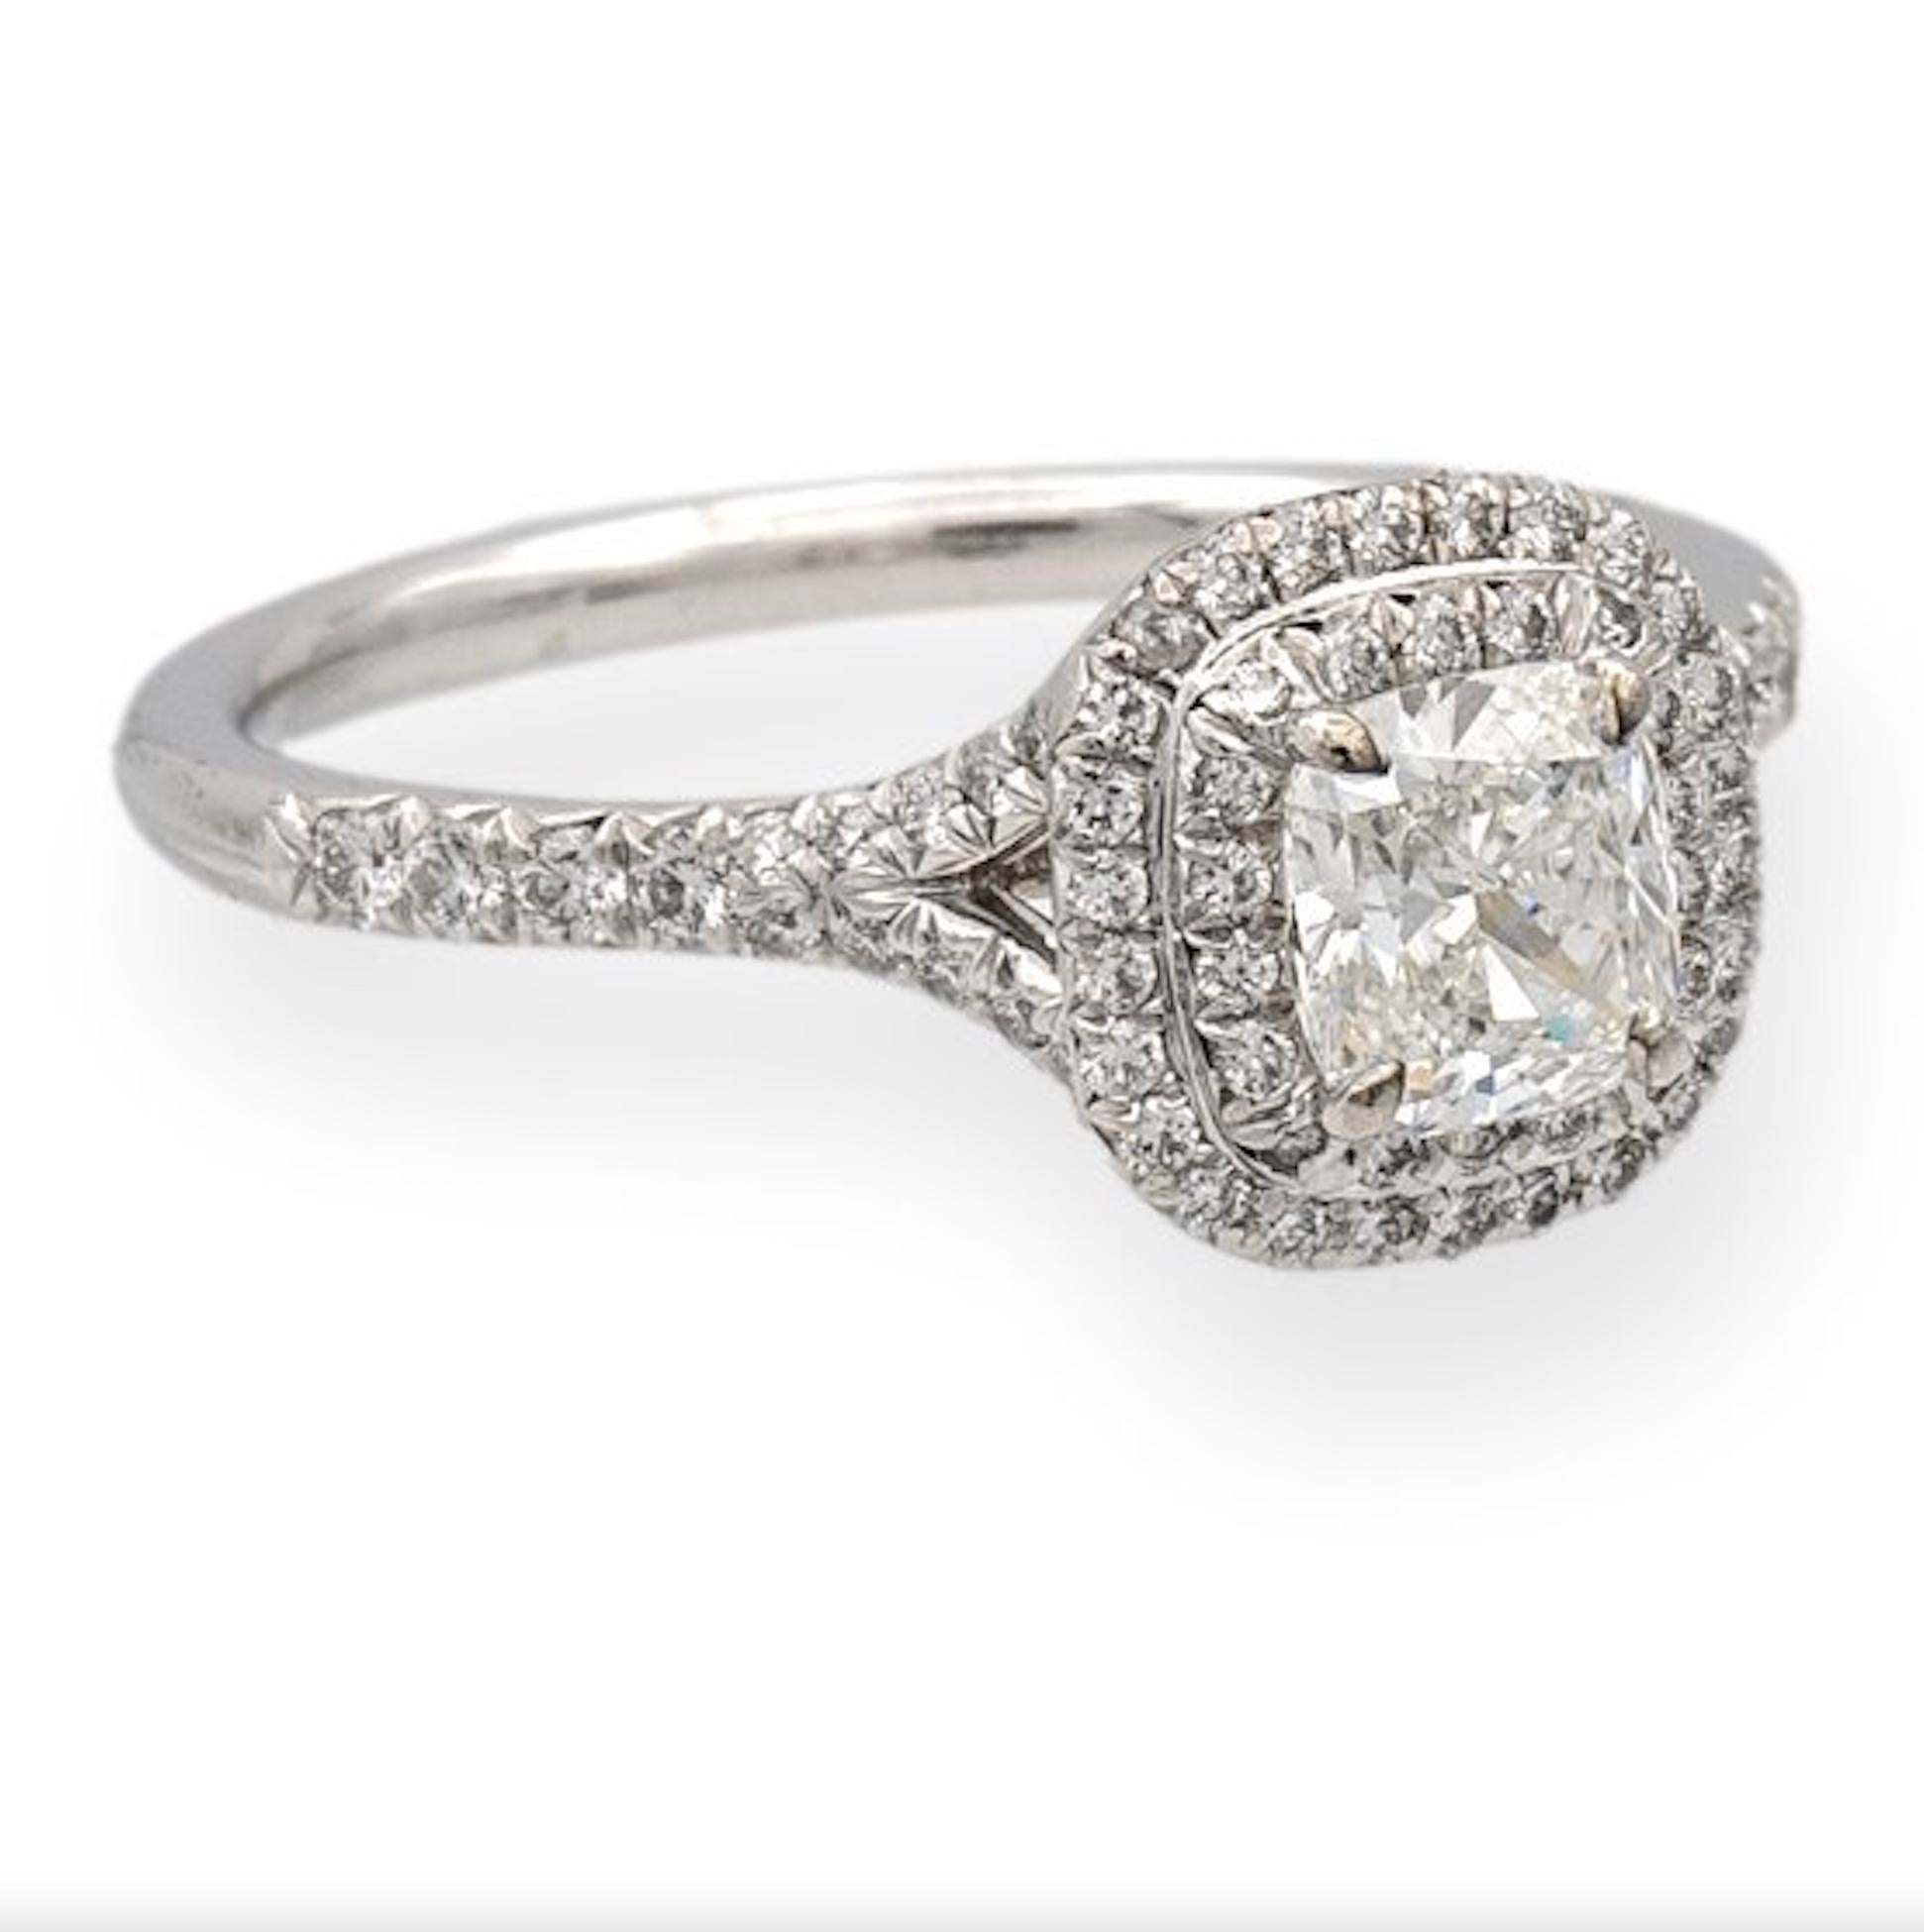 Tiffany & Co. engagement ring from the Soleste collection featuring a .78 ct cushion center , F Color, VVS2 clarity finely crafted in platinum, accented by a double row halo and split shank design with round brilliant cut bead set diamonds weighing